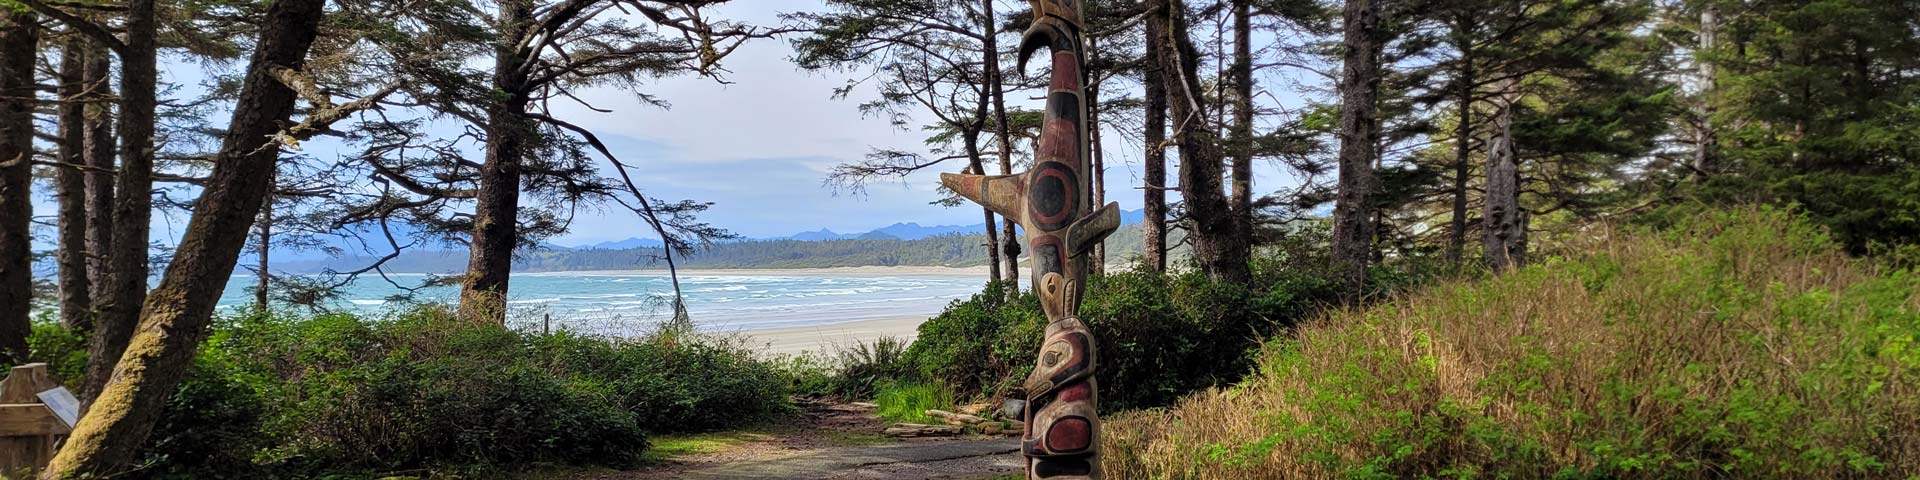 Looking through the trees at a beach with a totem pole in the foreground